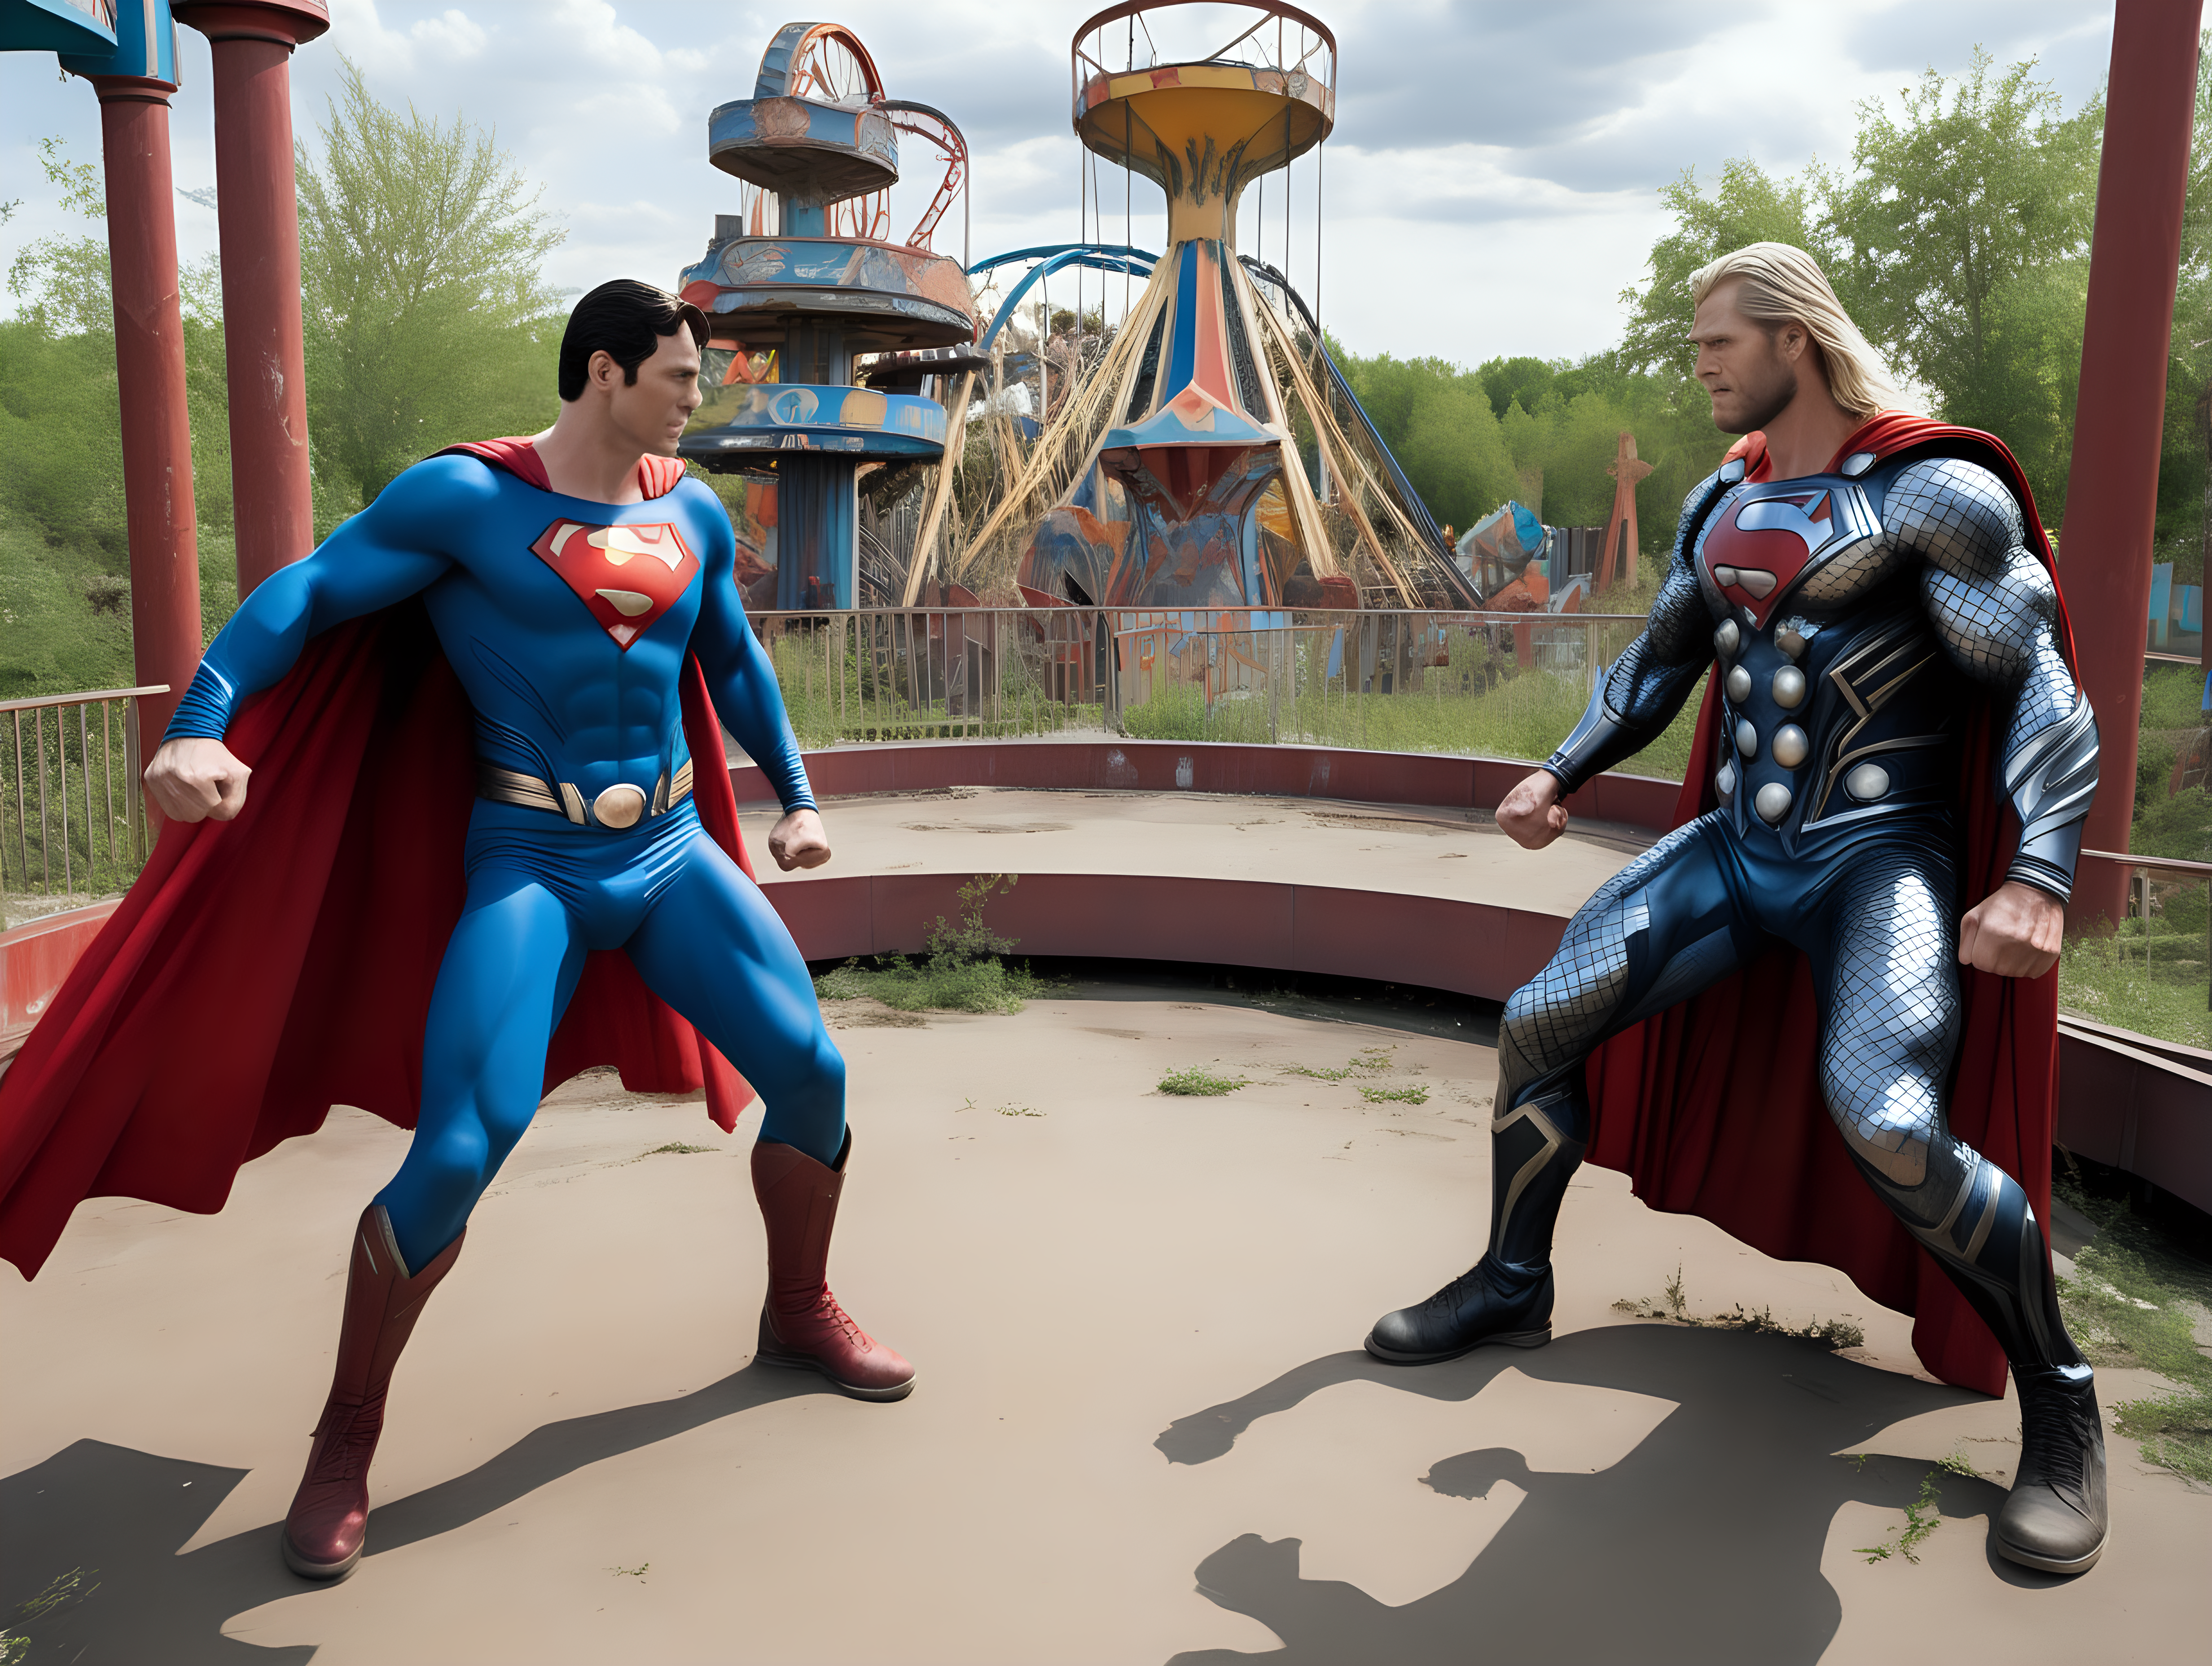 Superman fights Thor in an abandoned amusement park